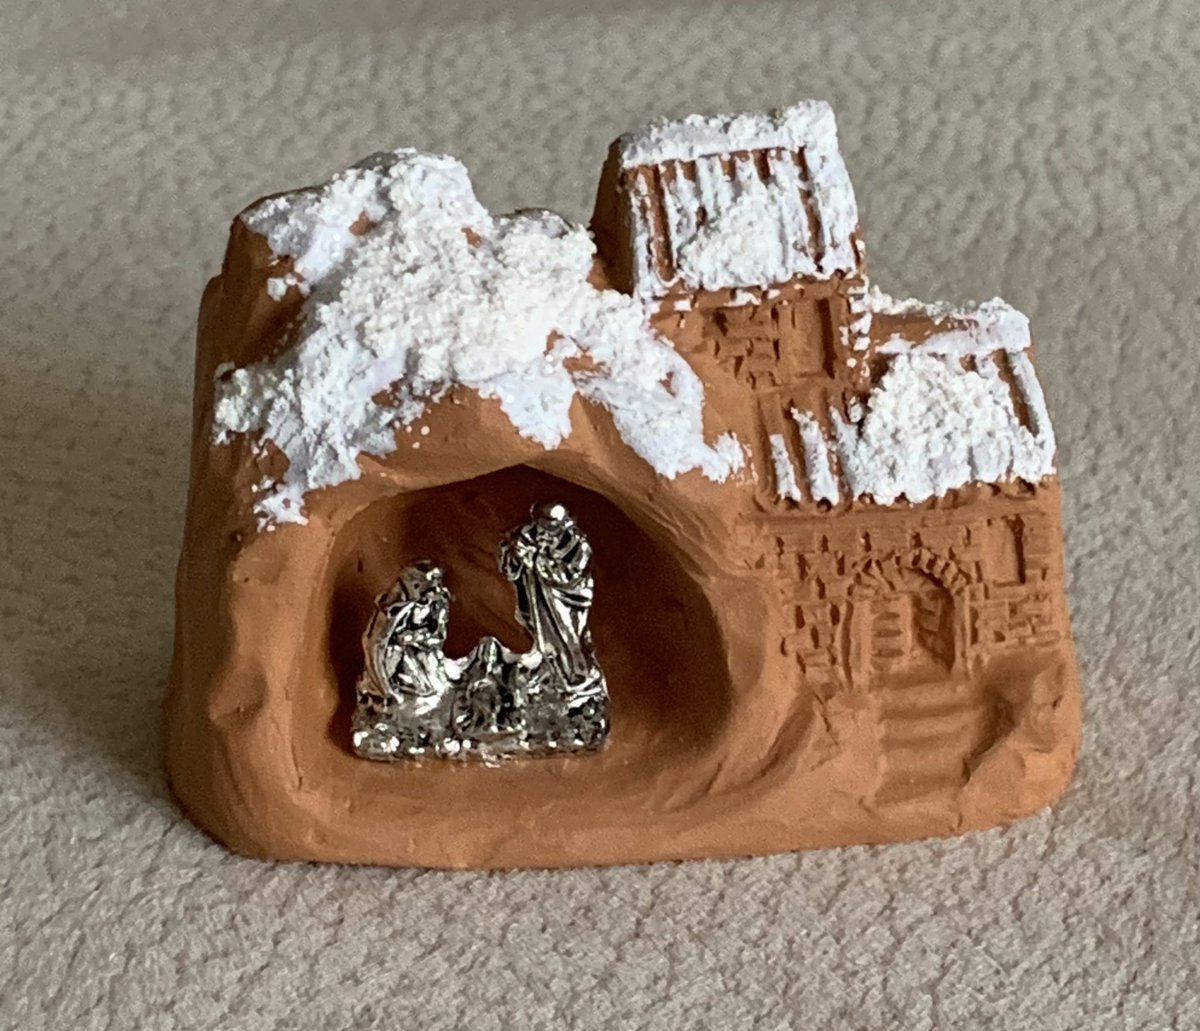 A nice tiny #Nativity scene in a snow-covered setting. Italy.
#MerryChristmas 

#presepe #Christmas #Xmas #collectibles #catholicX